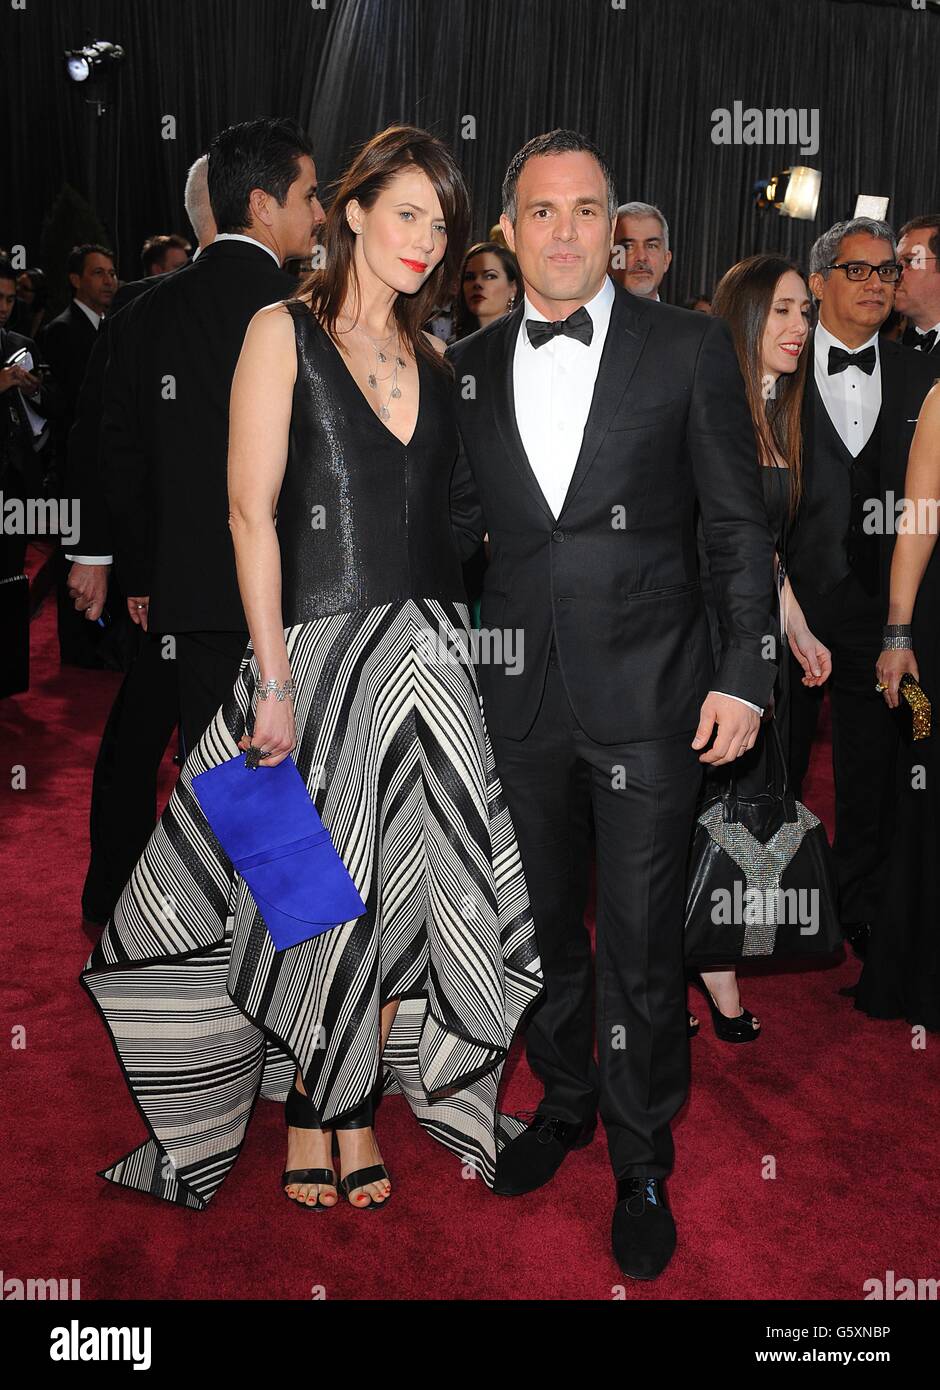 Mark Ruffalo and Sunrise Coigney arriving for the 85th Academy Awards at the Dolby Theatre, Los Angeles. Stock Photo